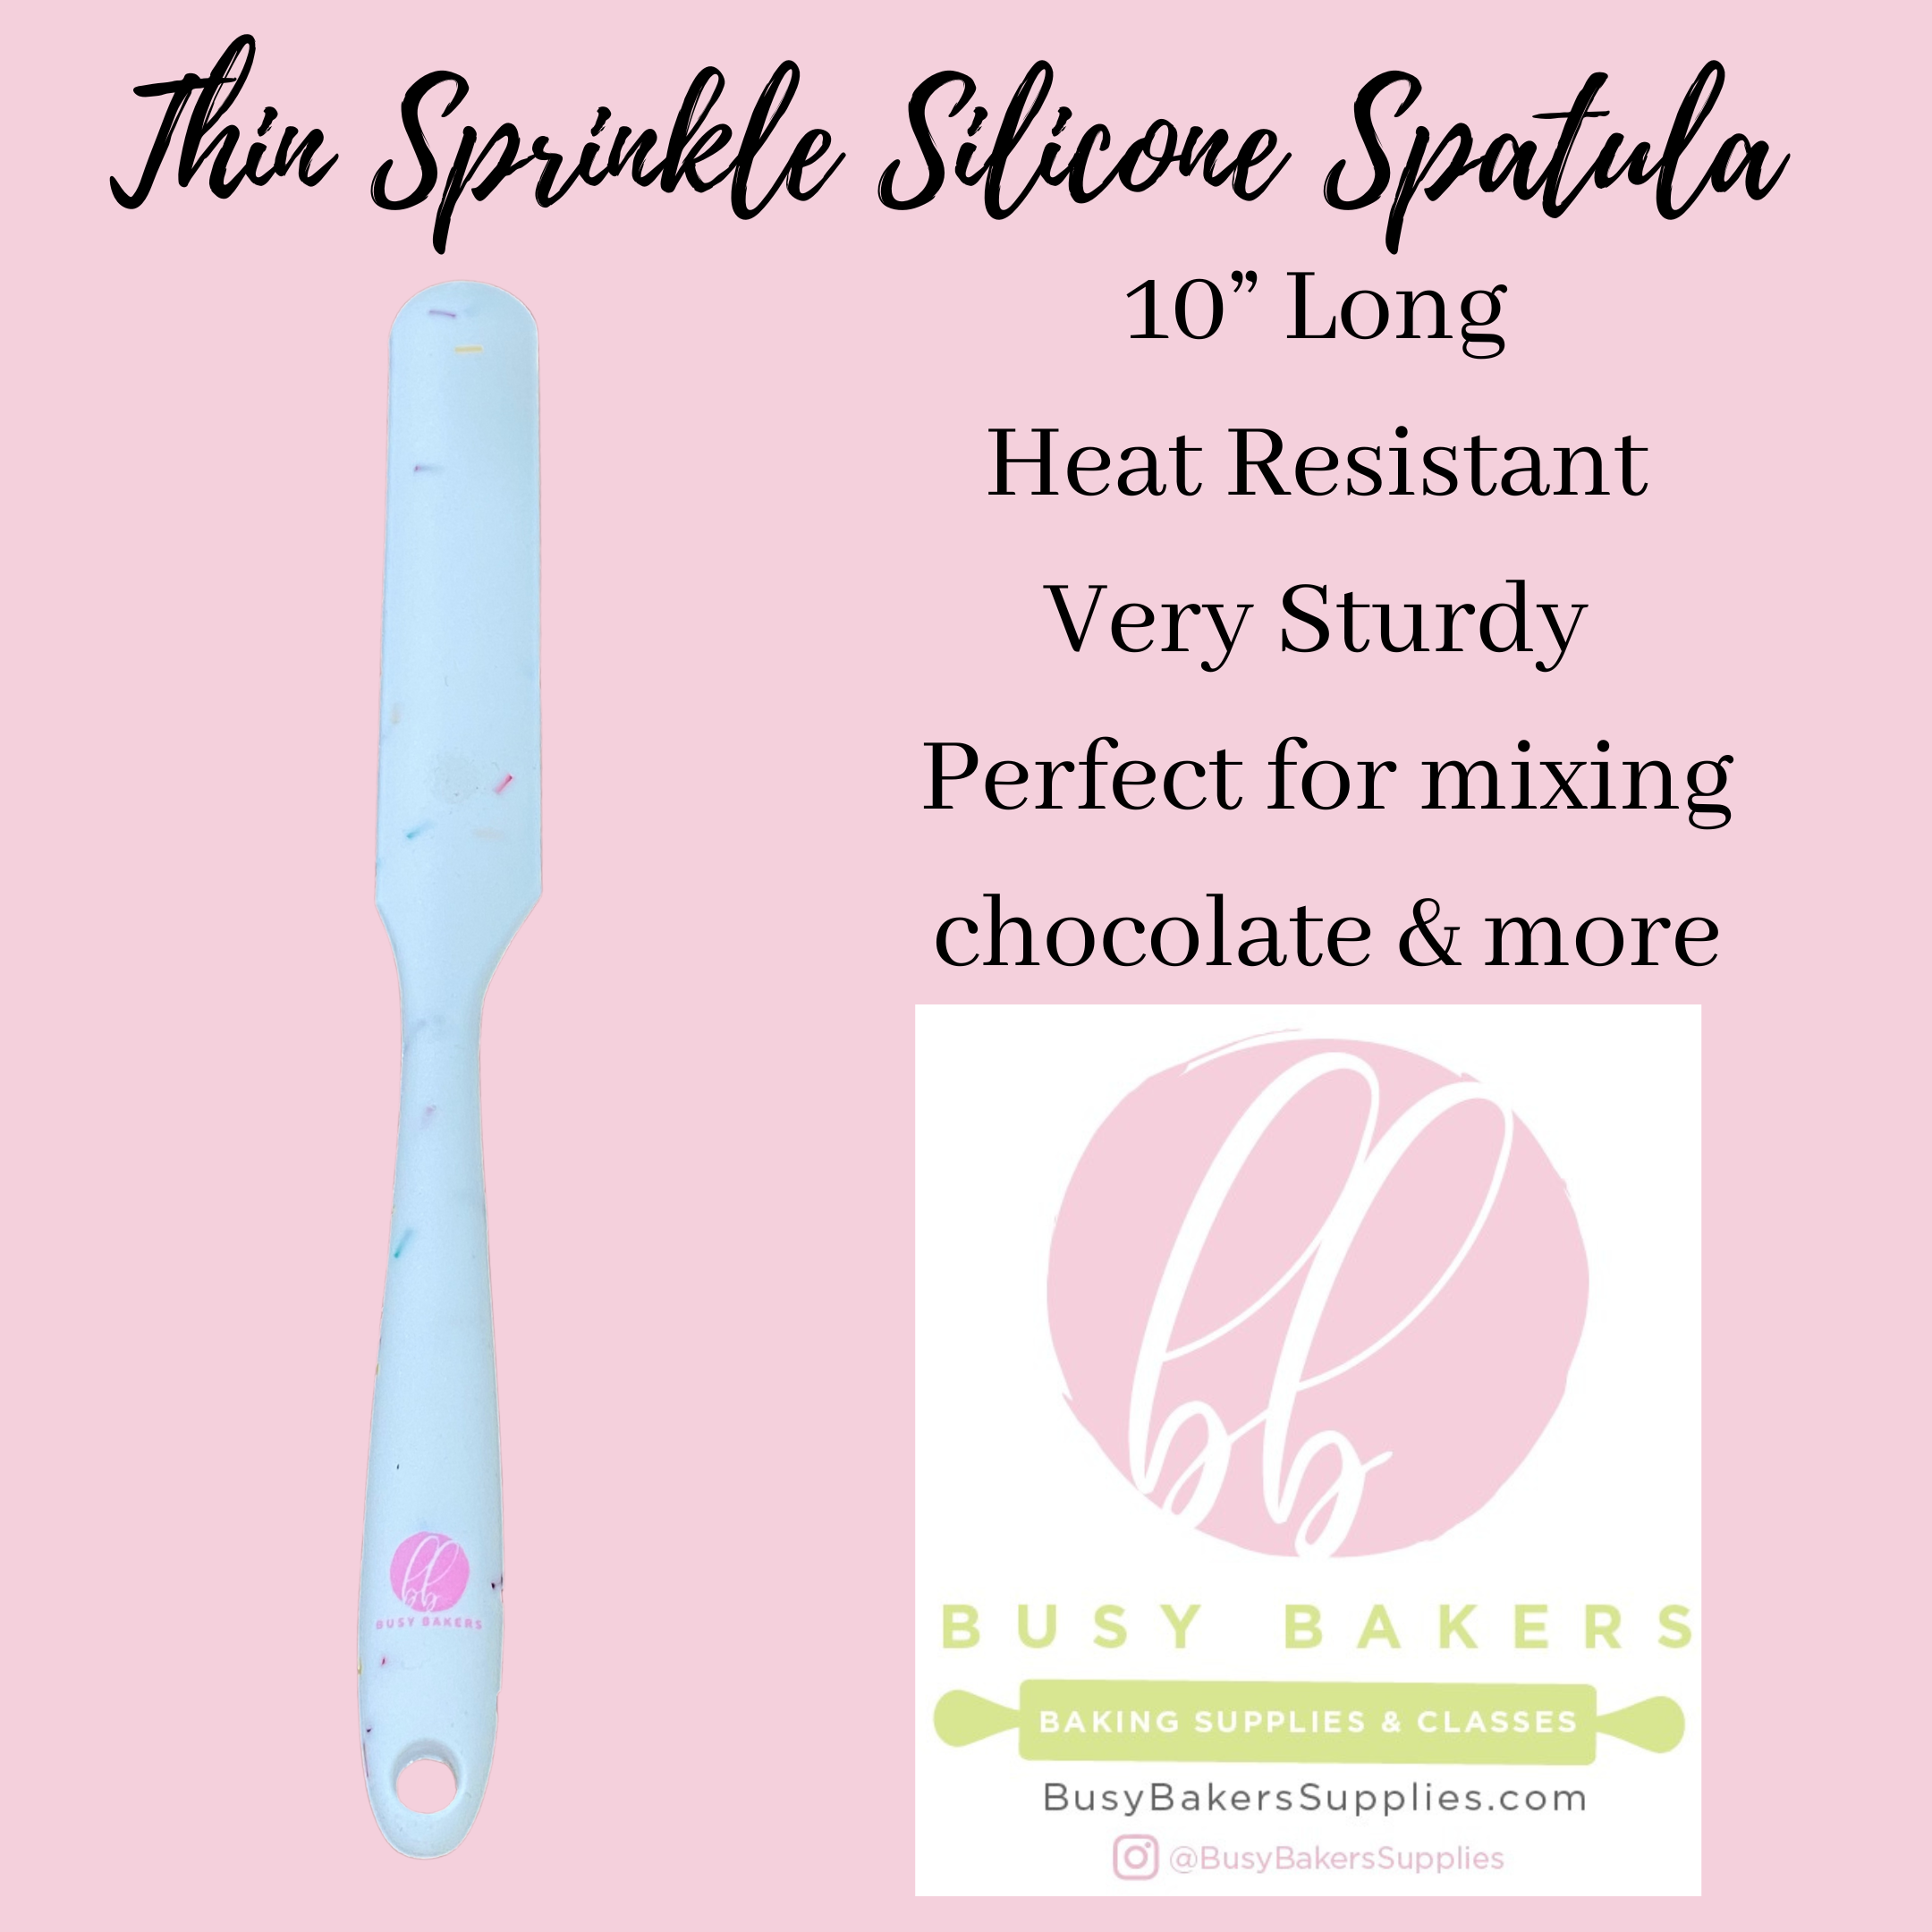 Thin Sprinkle Silicone Spatula – Busy Bakers Supplies